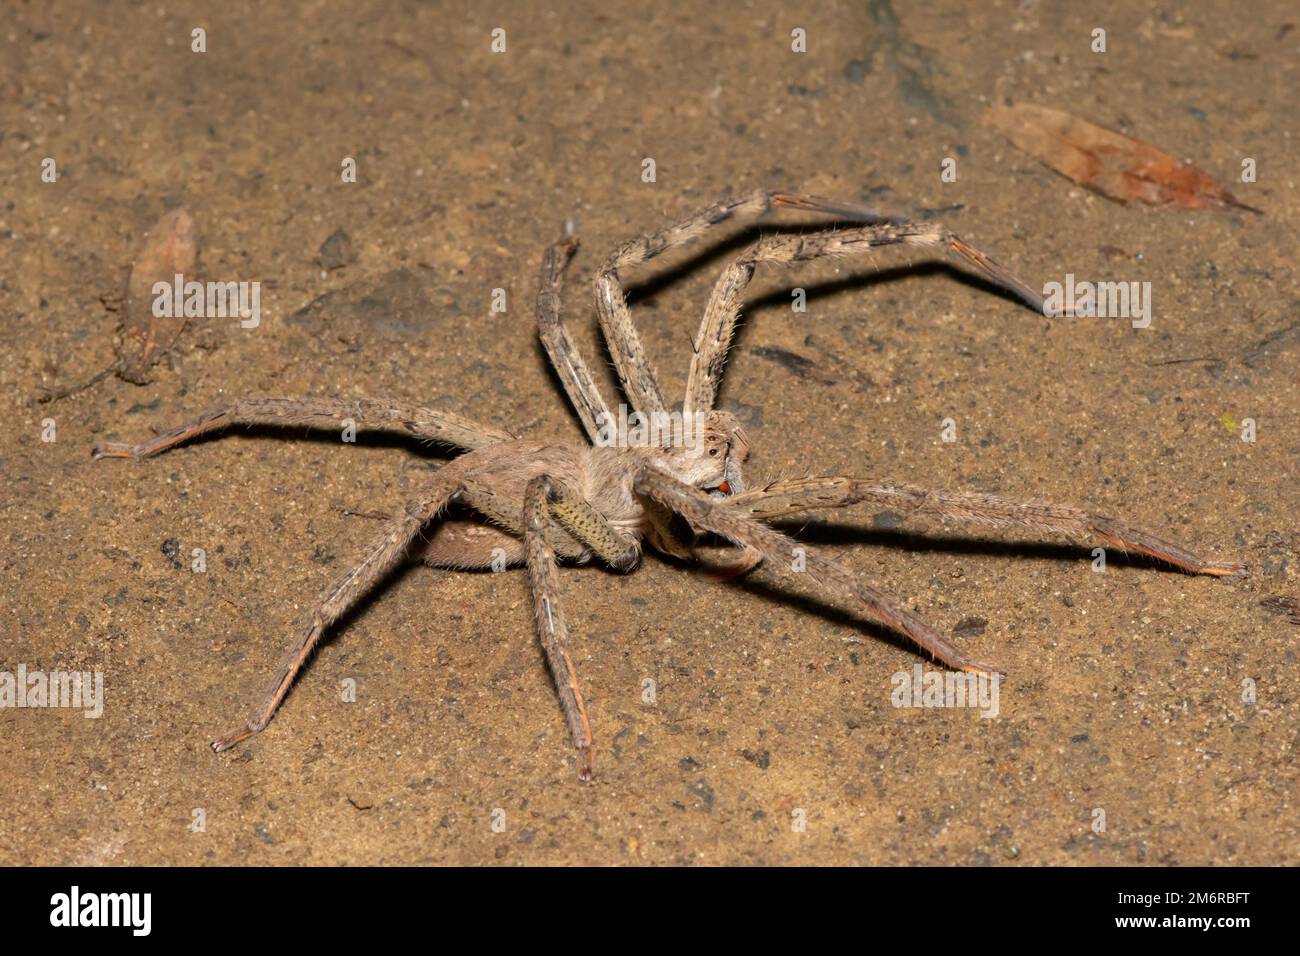 39 African Rain Spider Images, Stock Photos, 3D objects, & Vectors